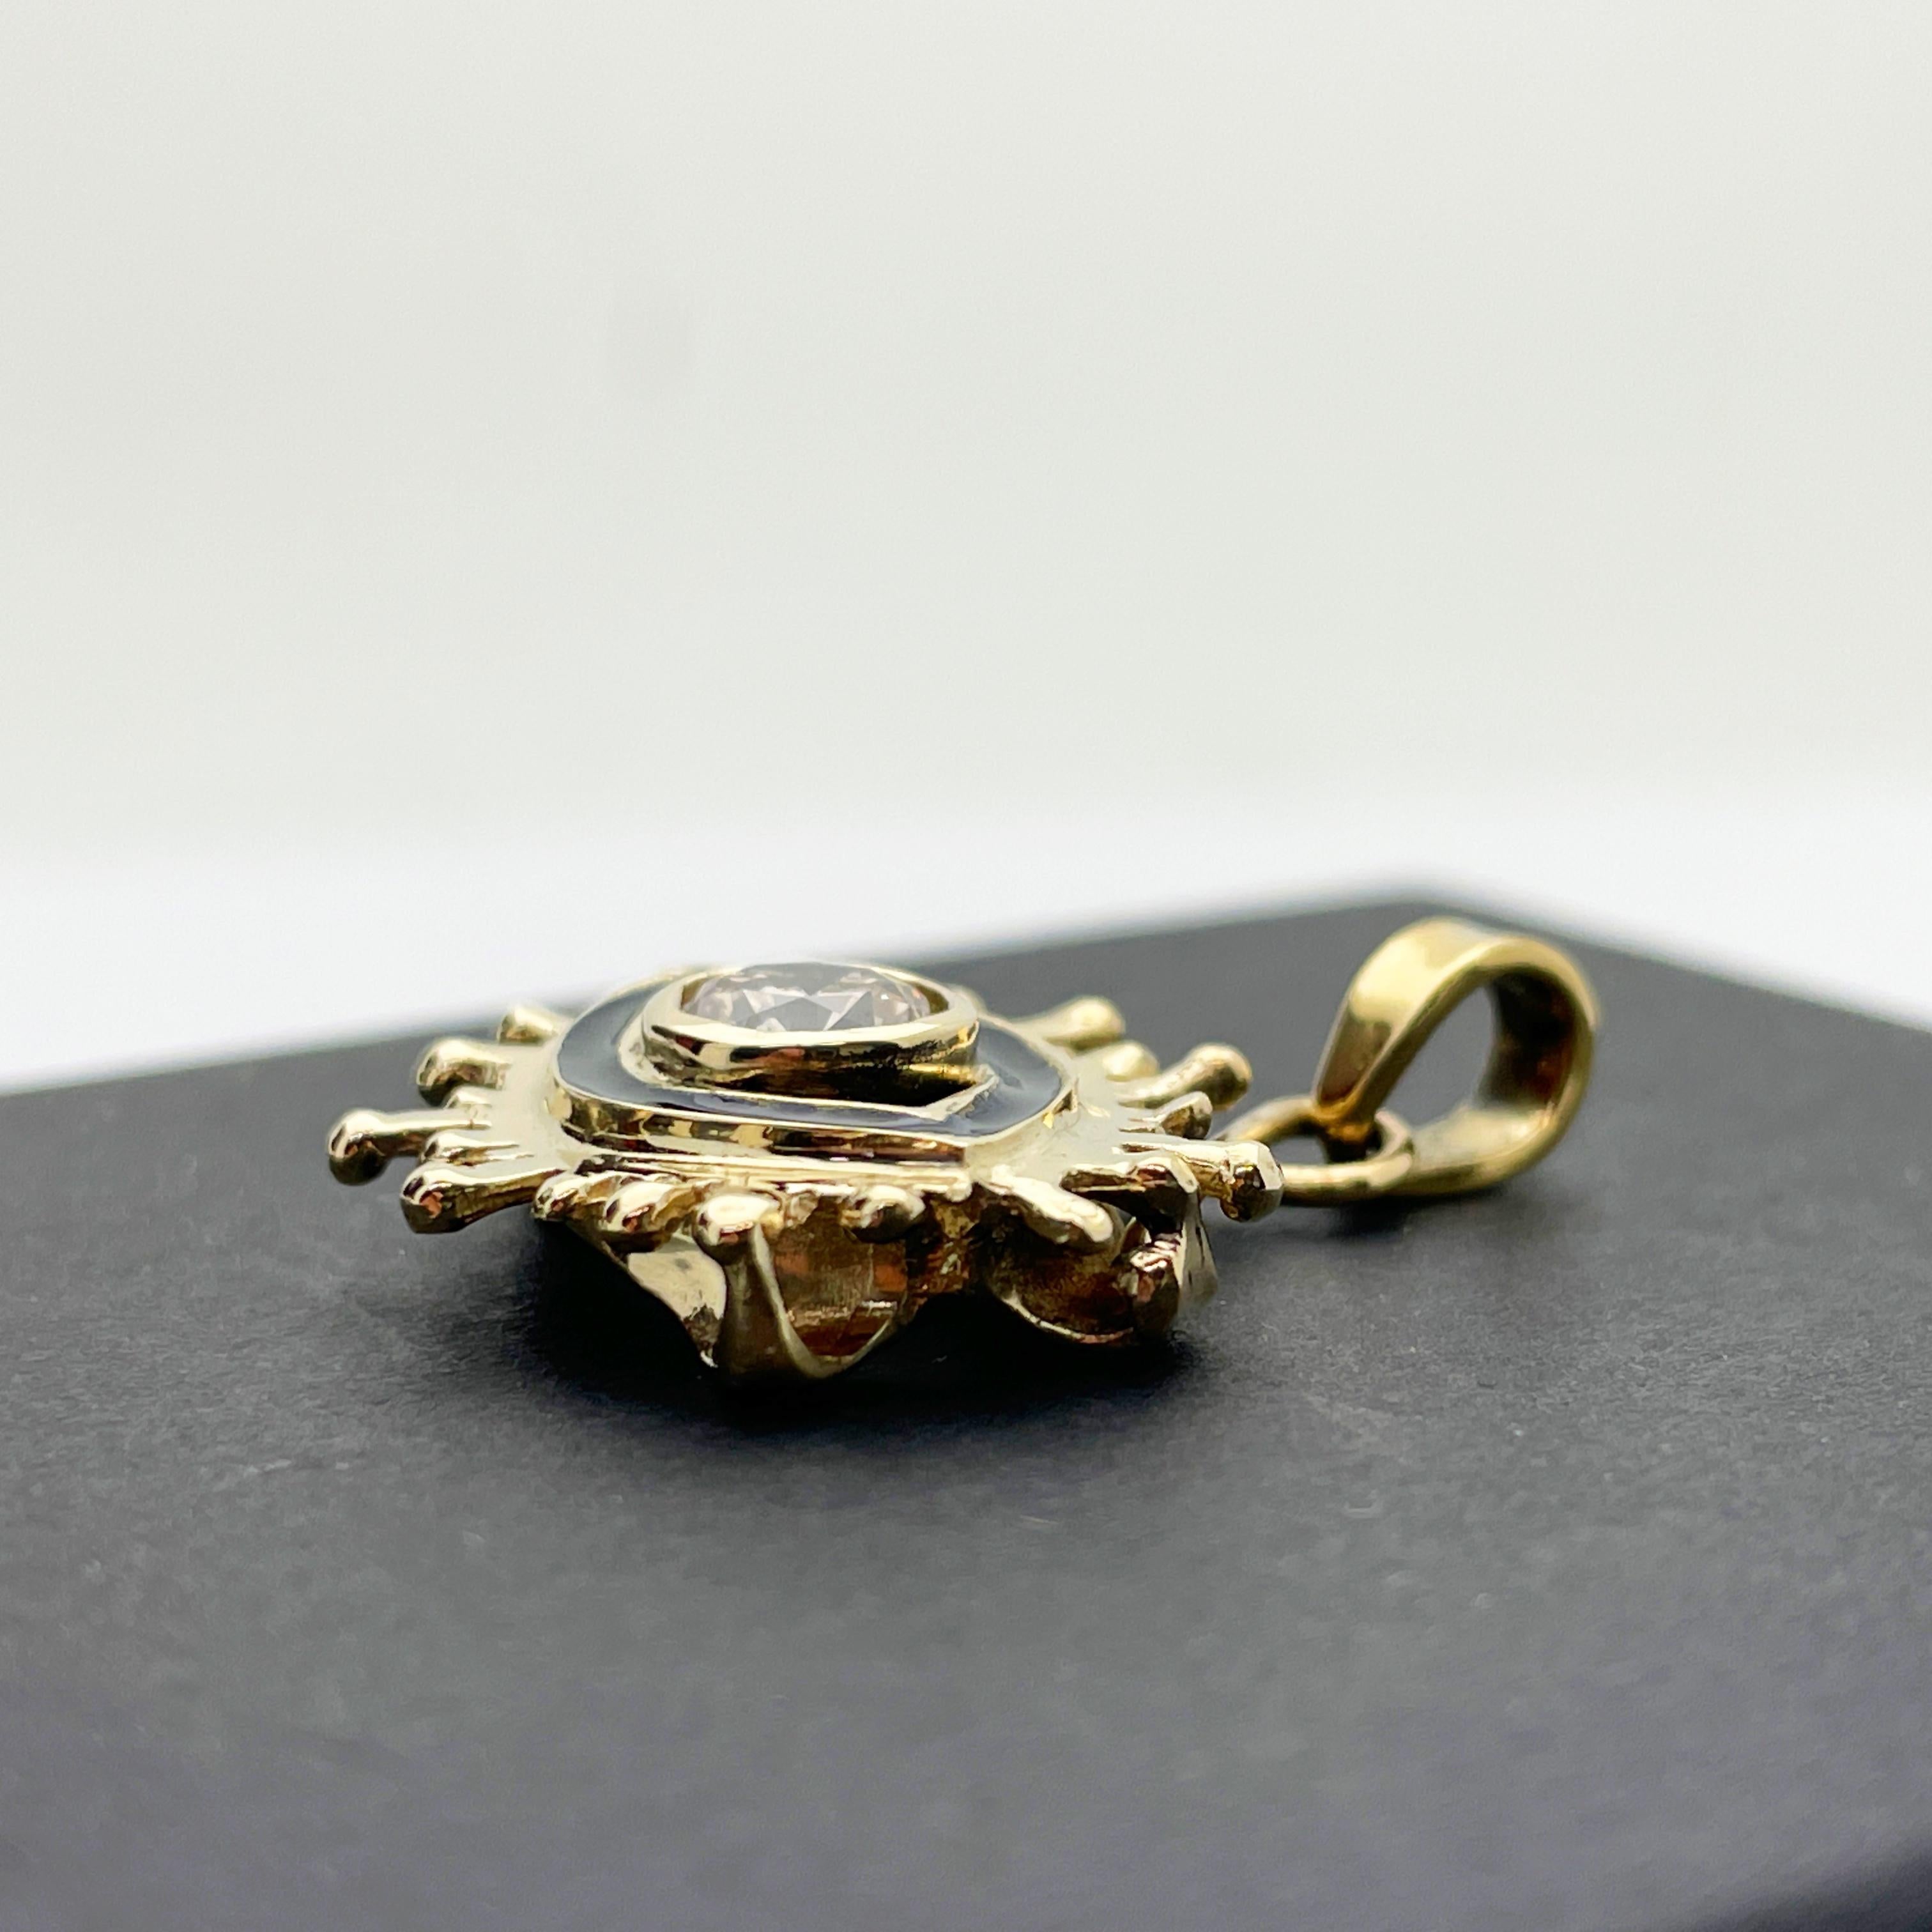 Here is a beautiful and BRAND NEW 18k Yellow Gold Custom Made 